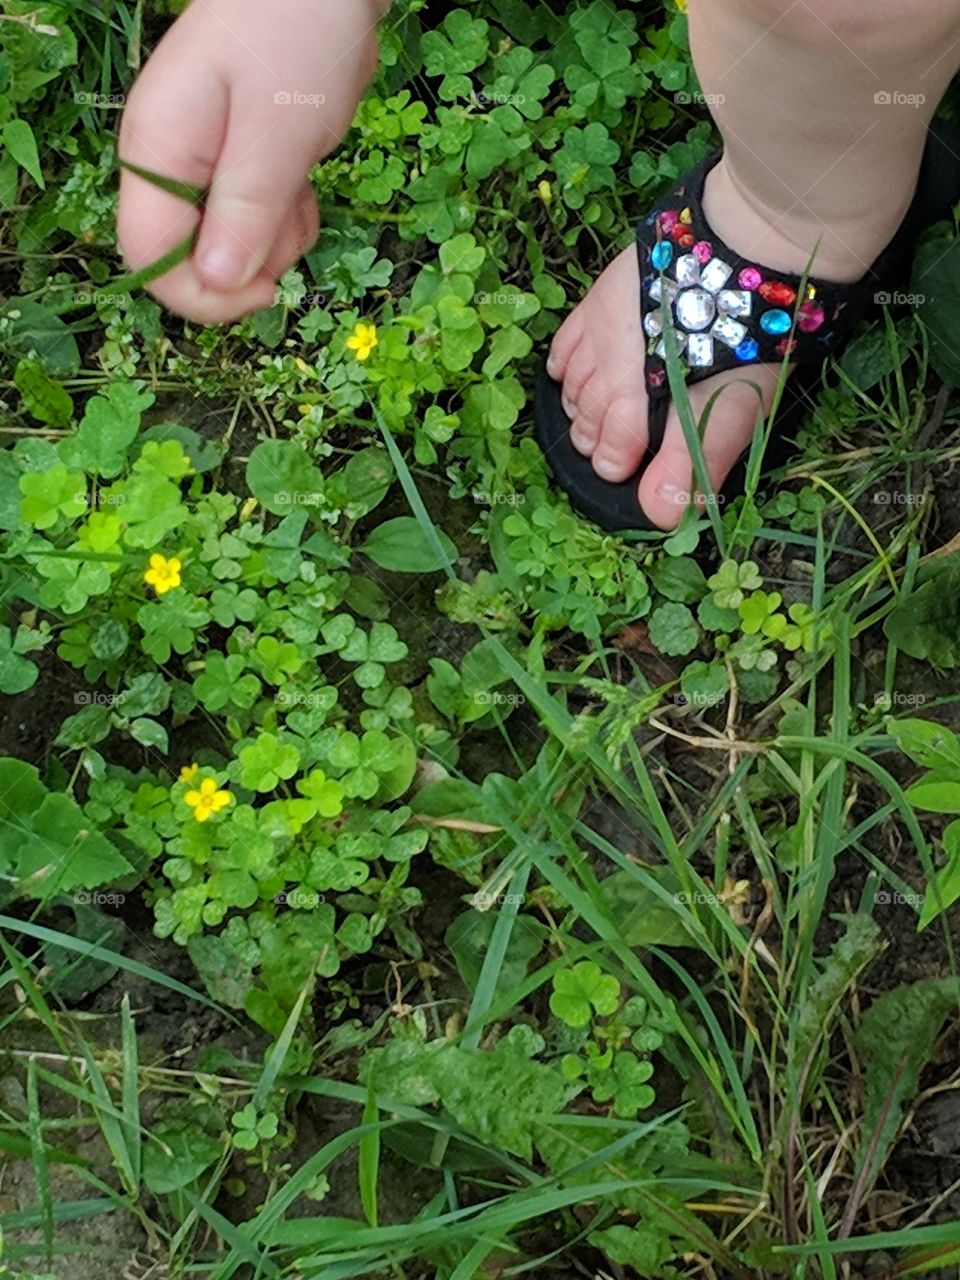 clover and baby toes